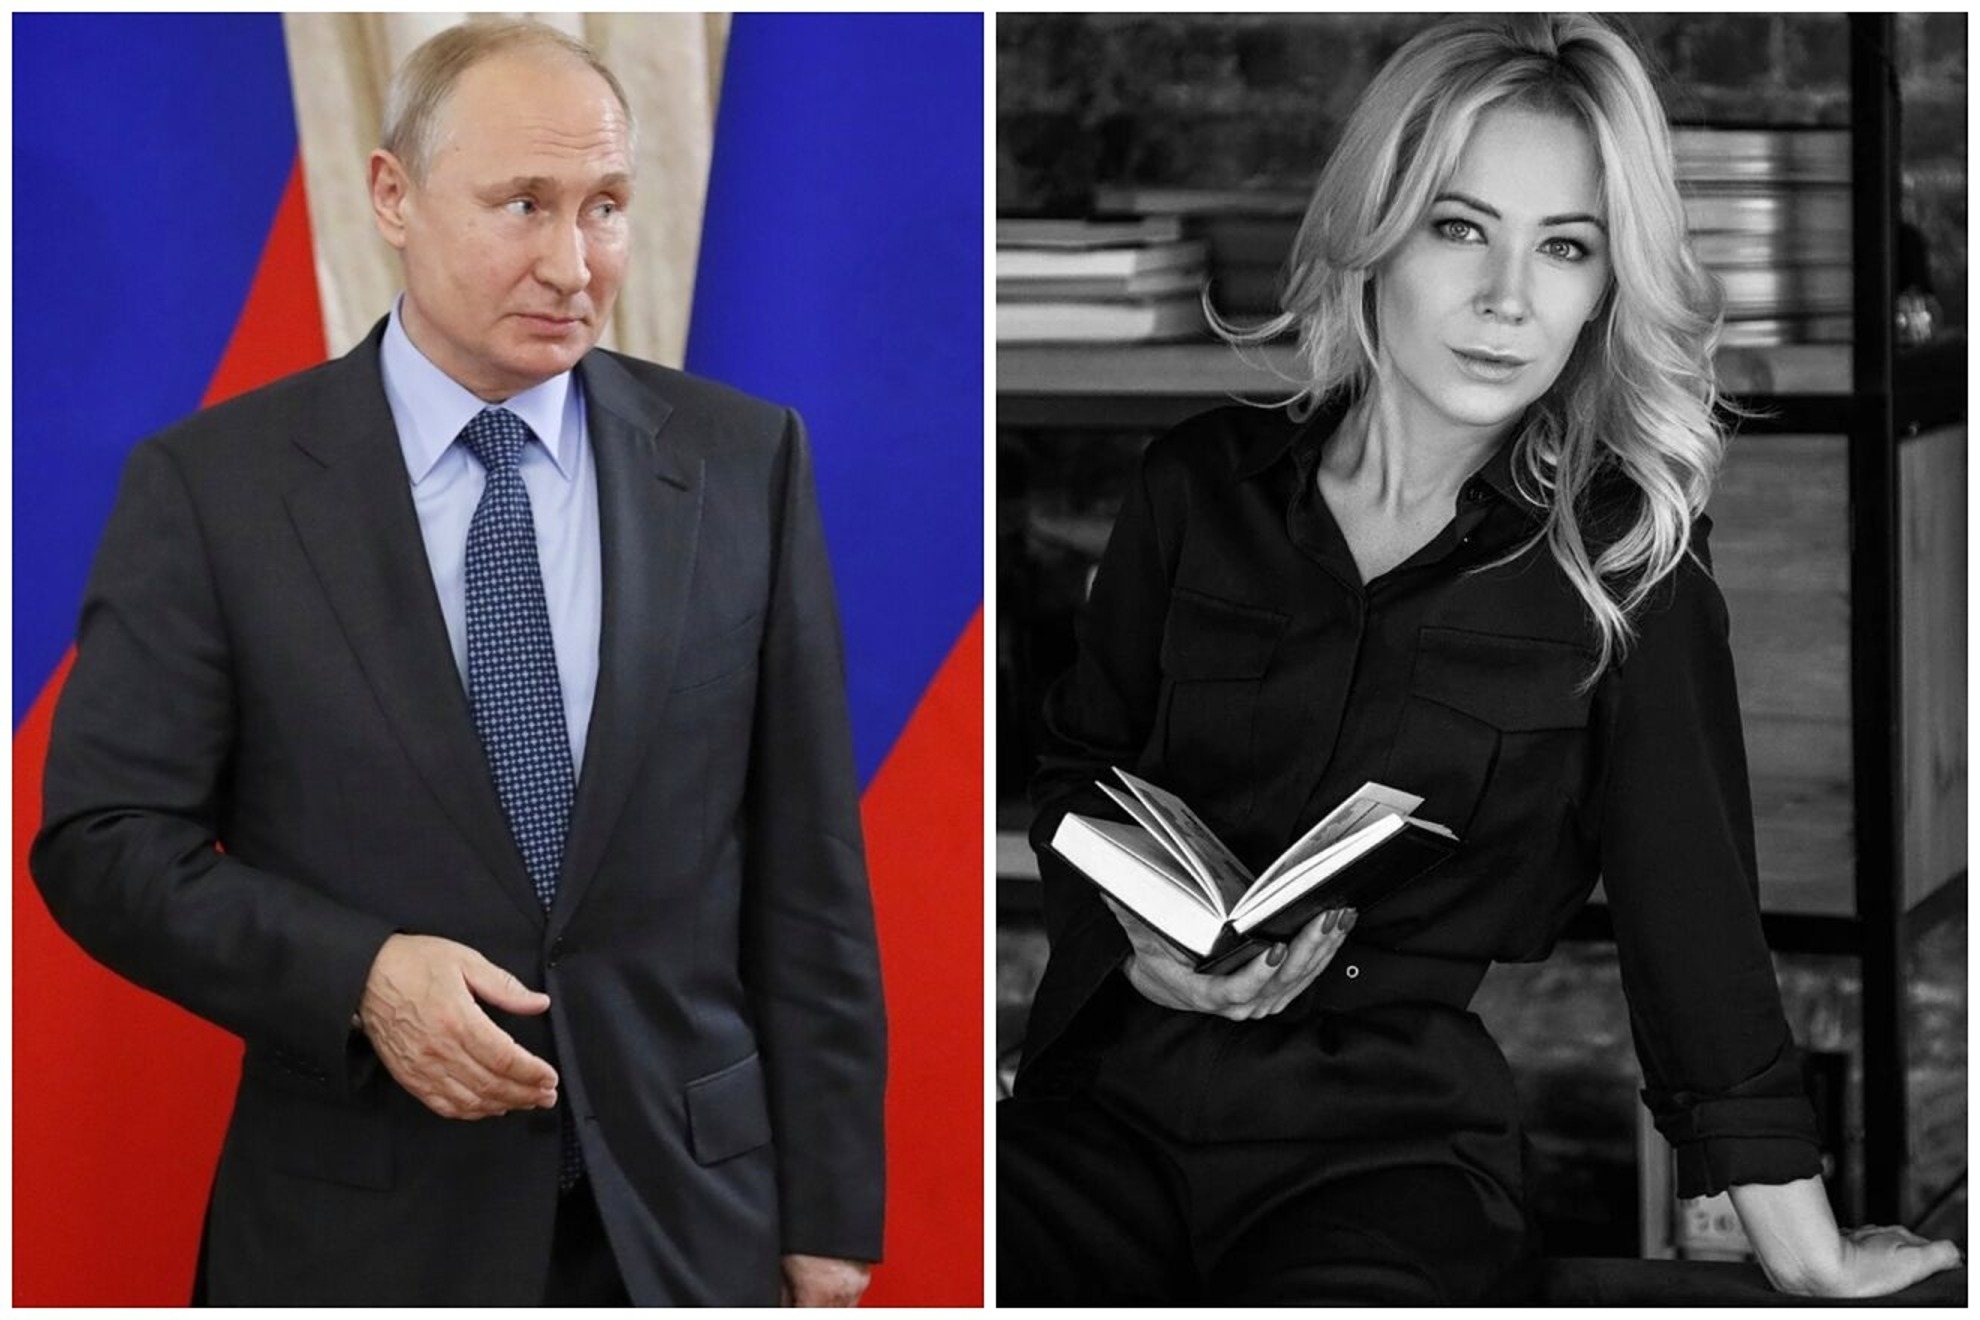 Putin finds love in internet analyst over 30 years younger than him